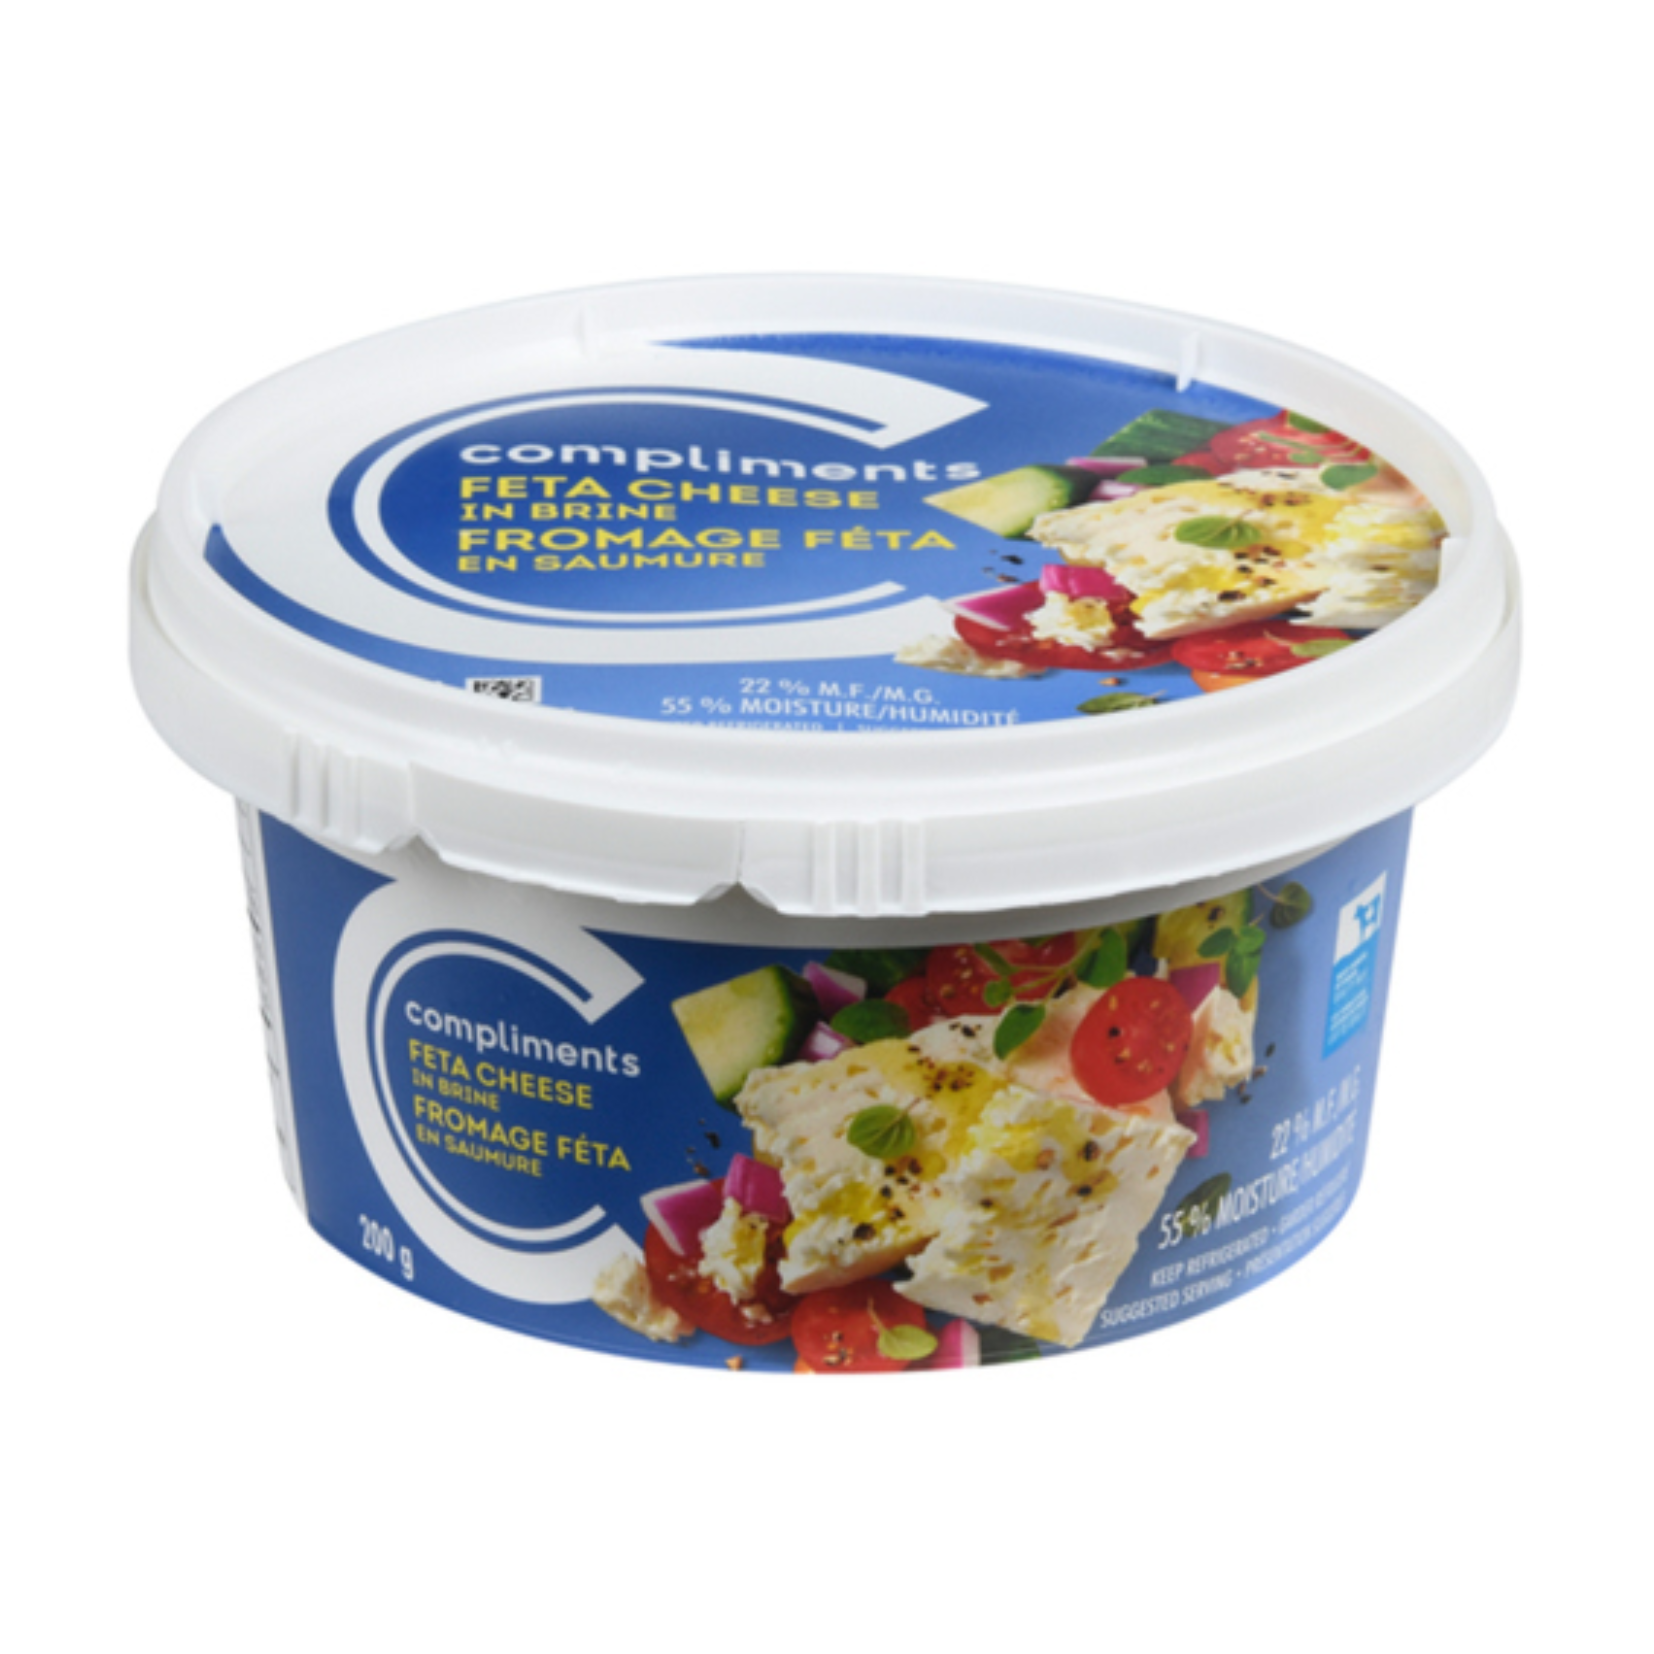 Compliments Feta Cheese in Brine 200g